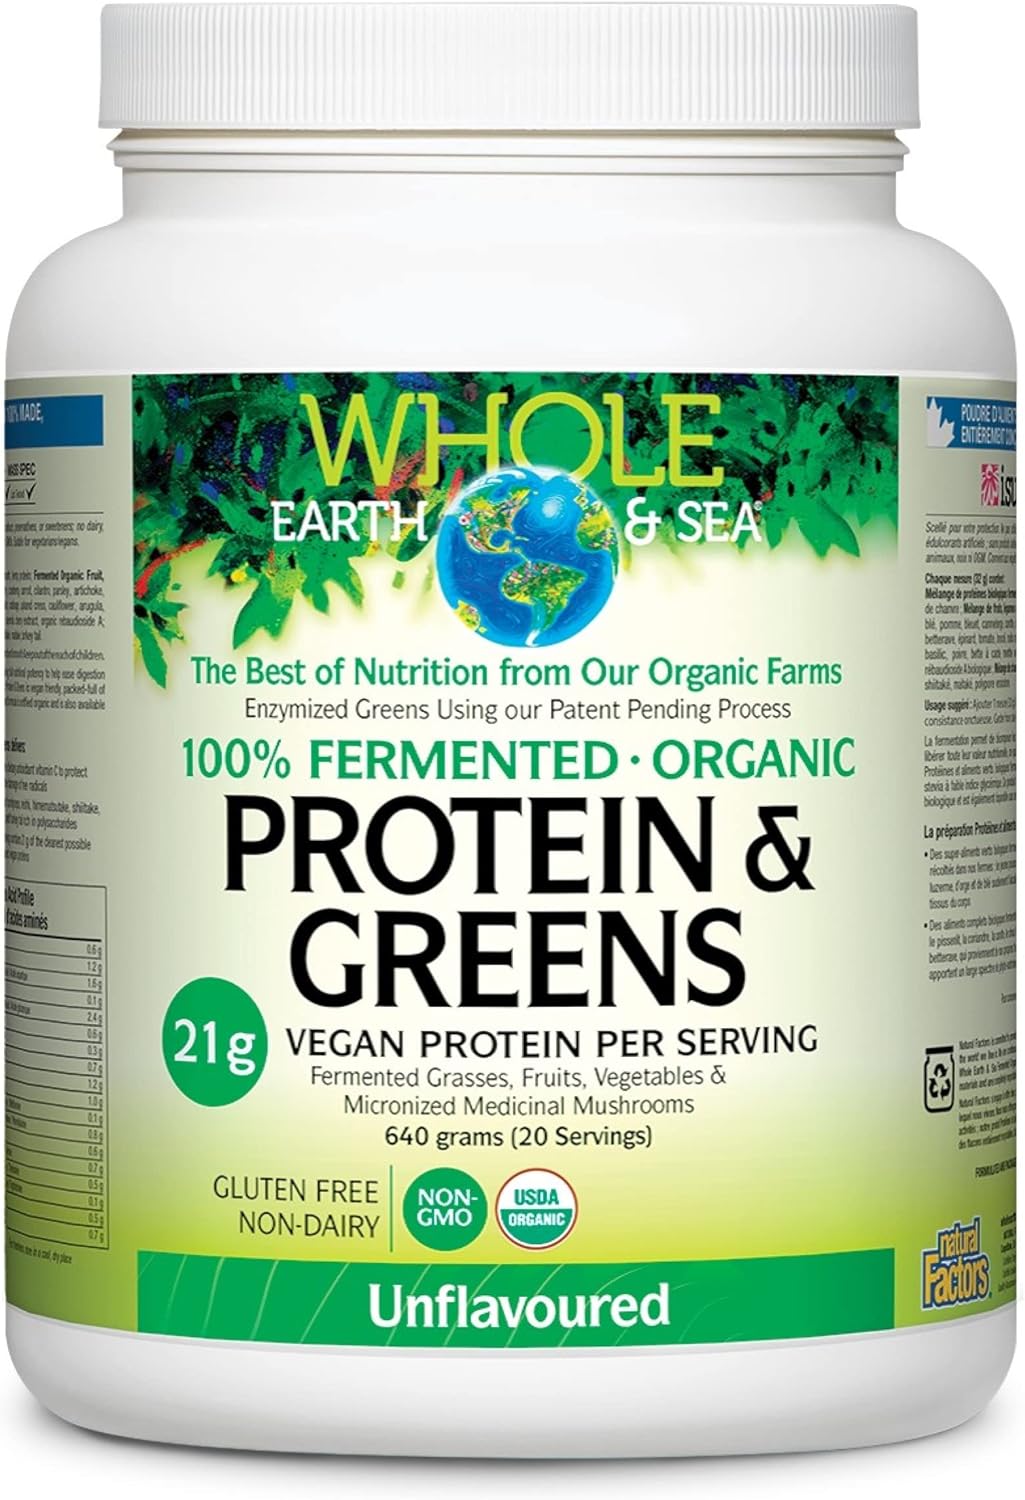 Whole Earth And Sea Protein & Greens Unflavored 640g